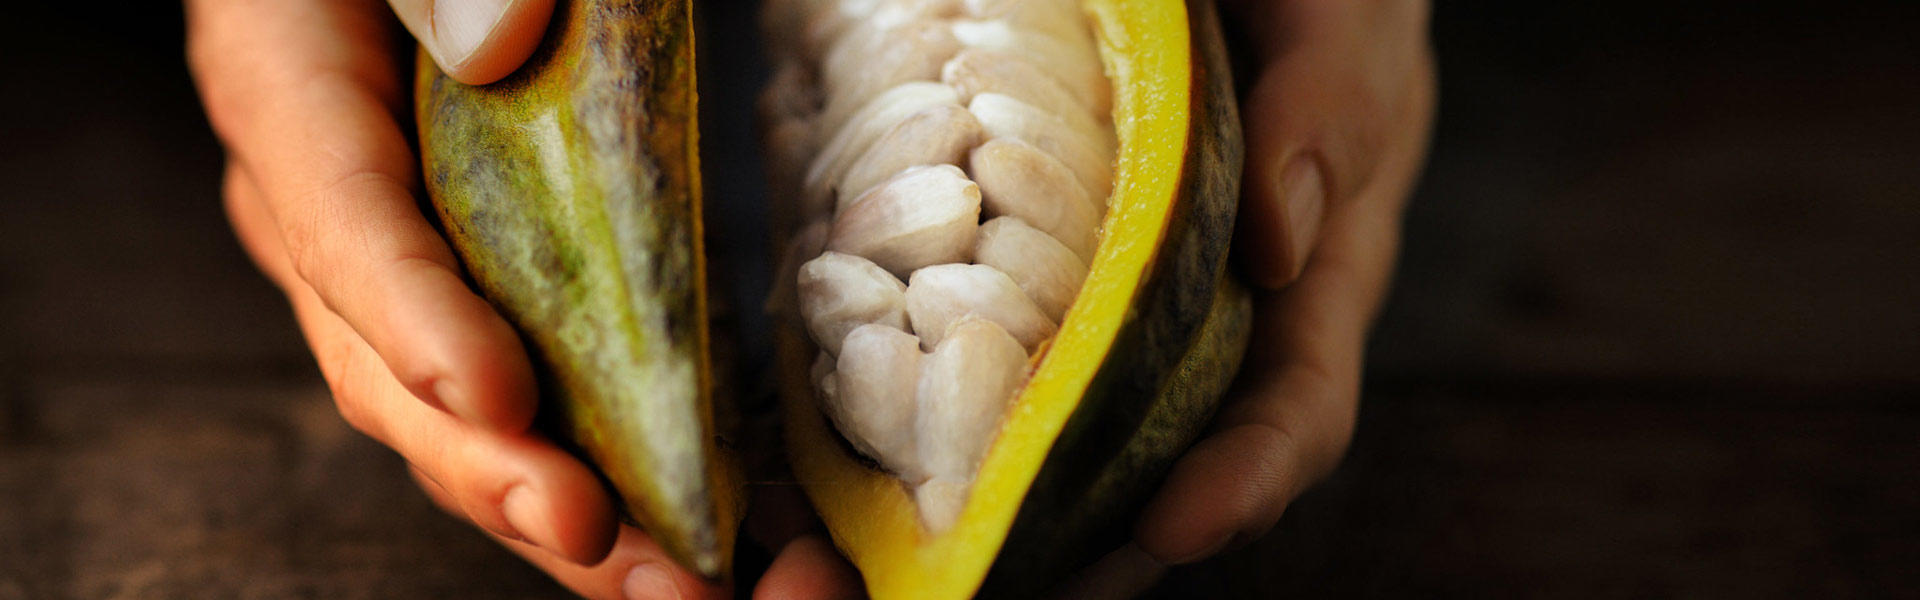 A cocoa fruit held open showing the cocoa beans inside